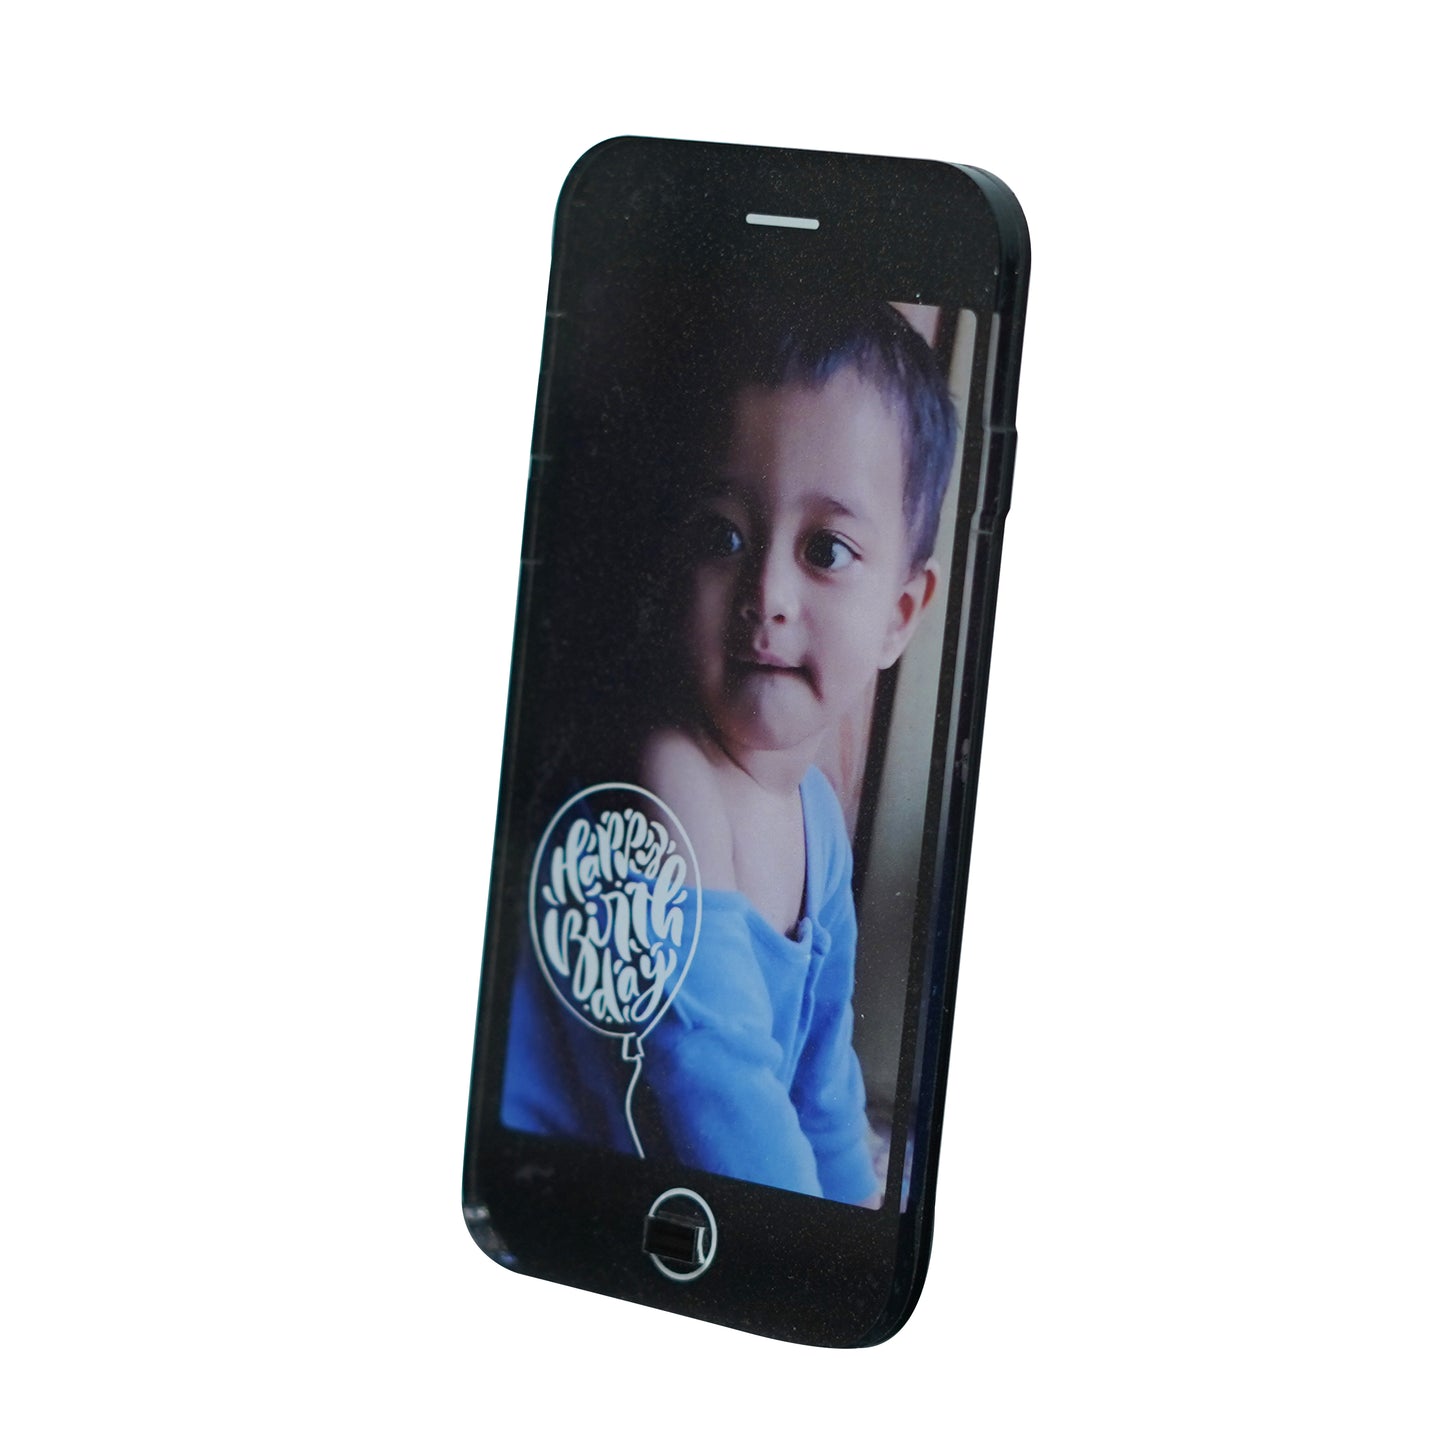 Personalised Mobile Photo gift for kids